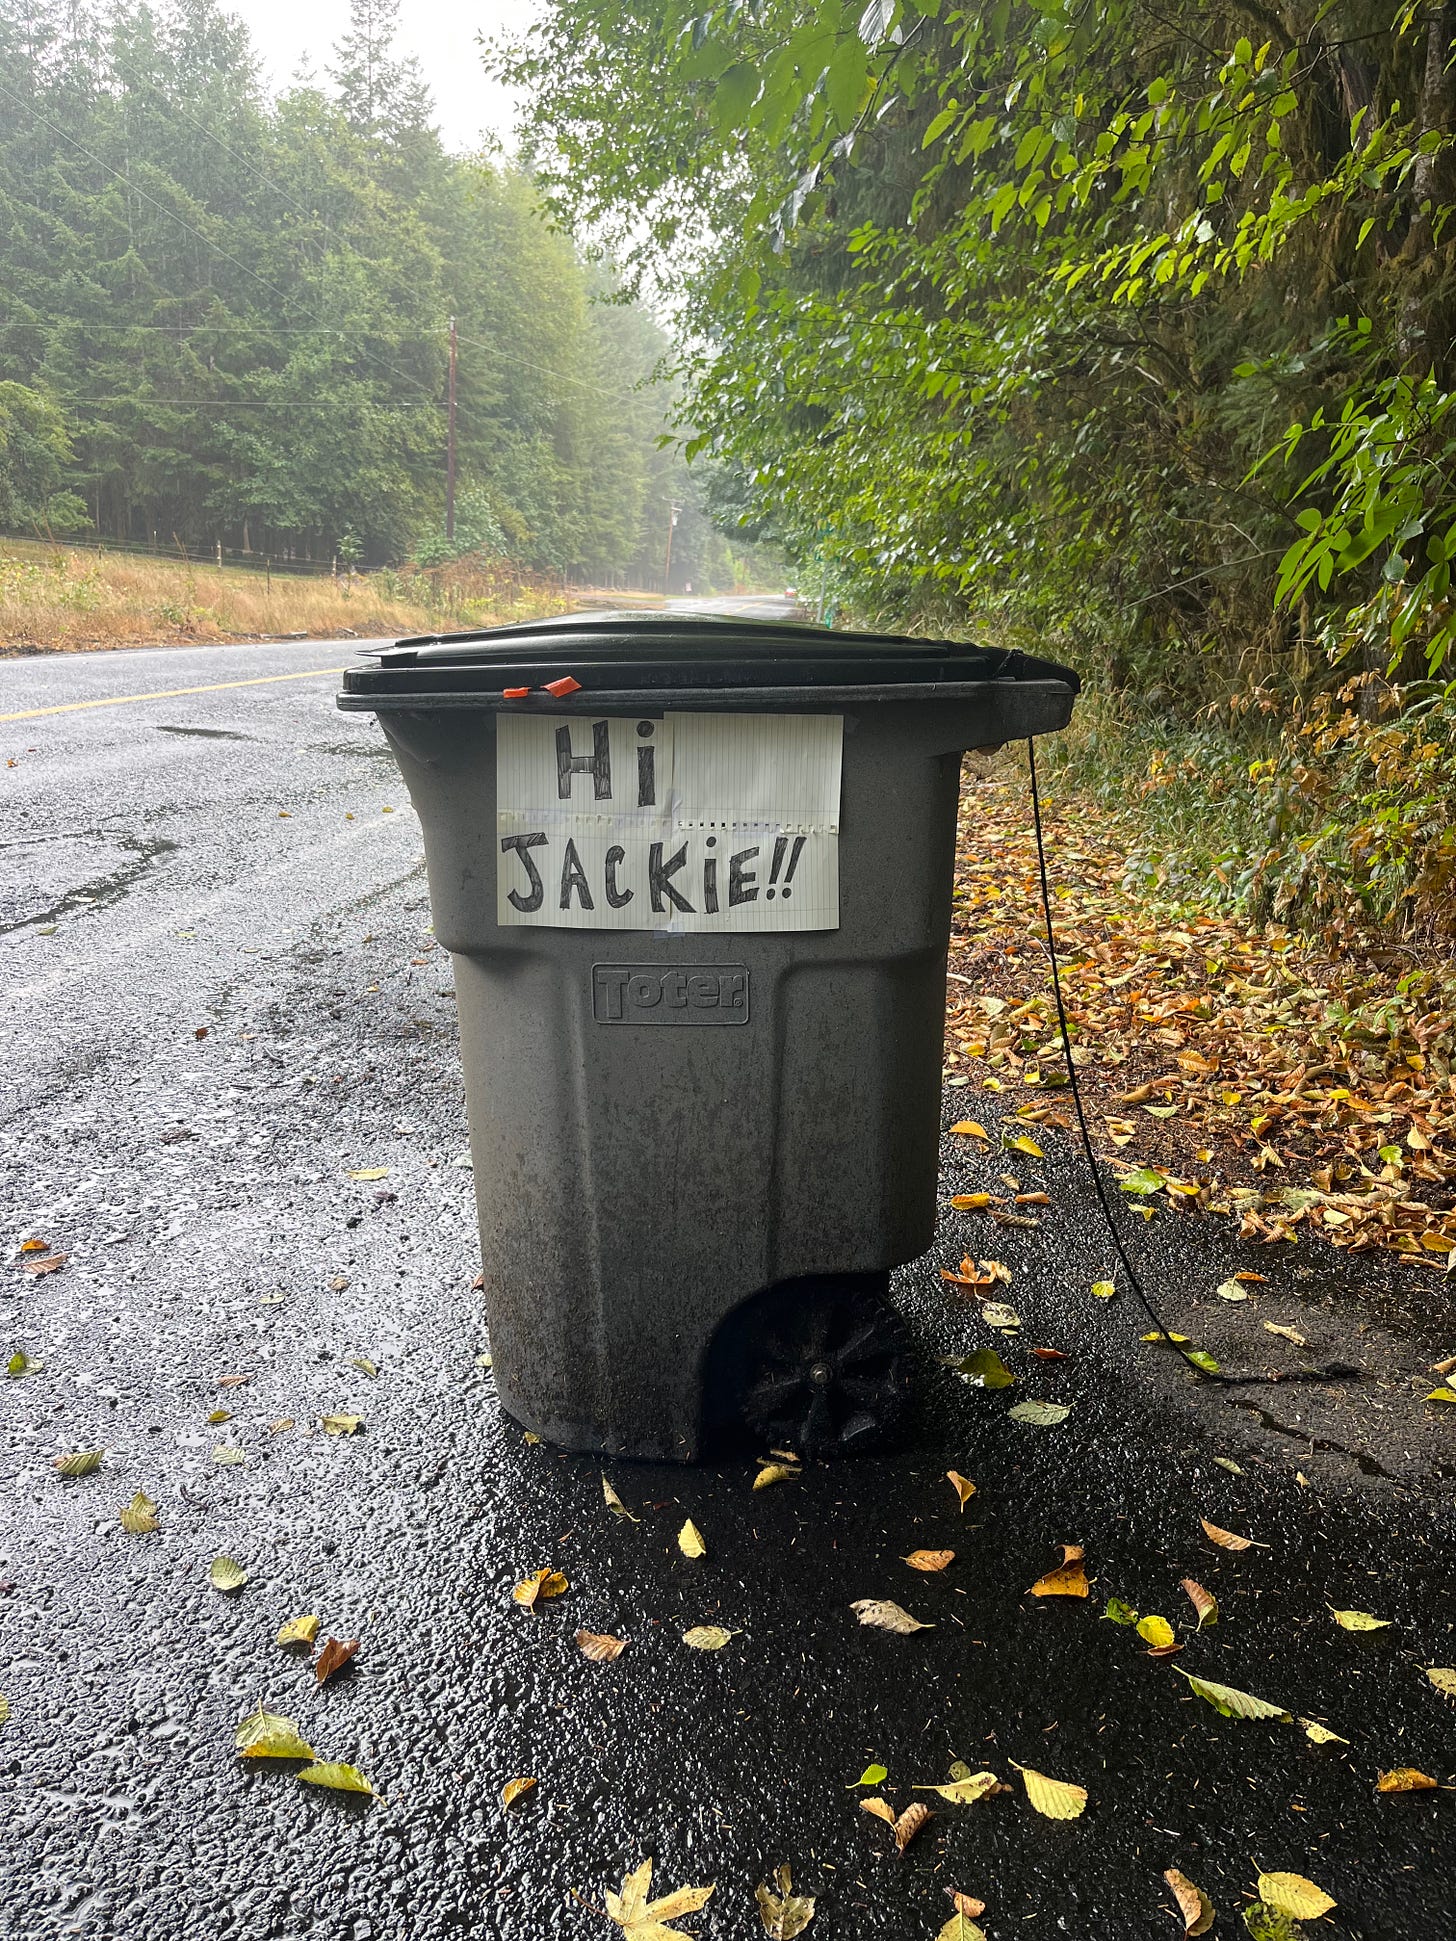 A black garbage bin on the side of the road with a sign taped to it that reads "Hi Jackie!!"